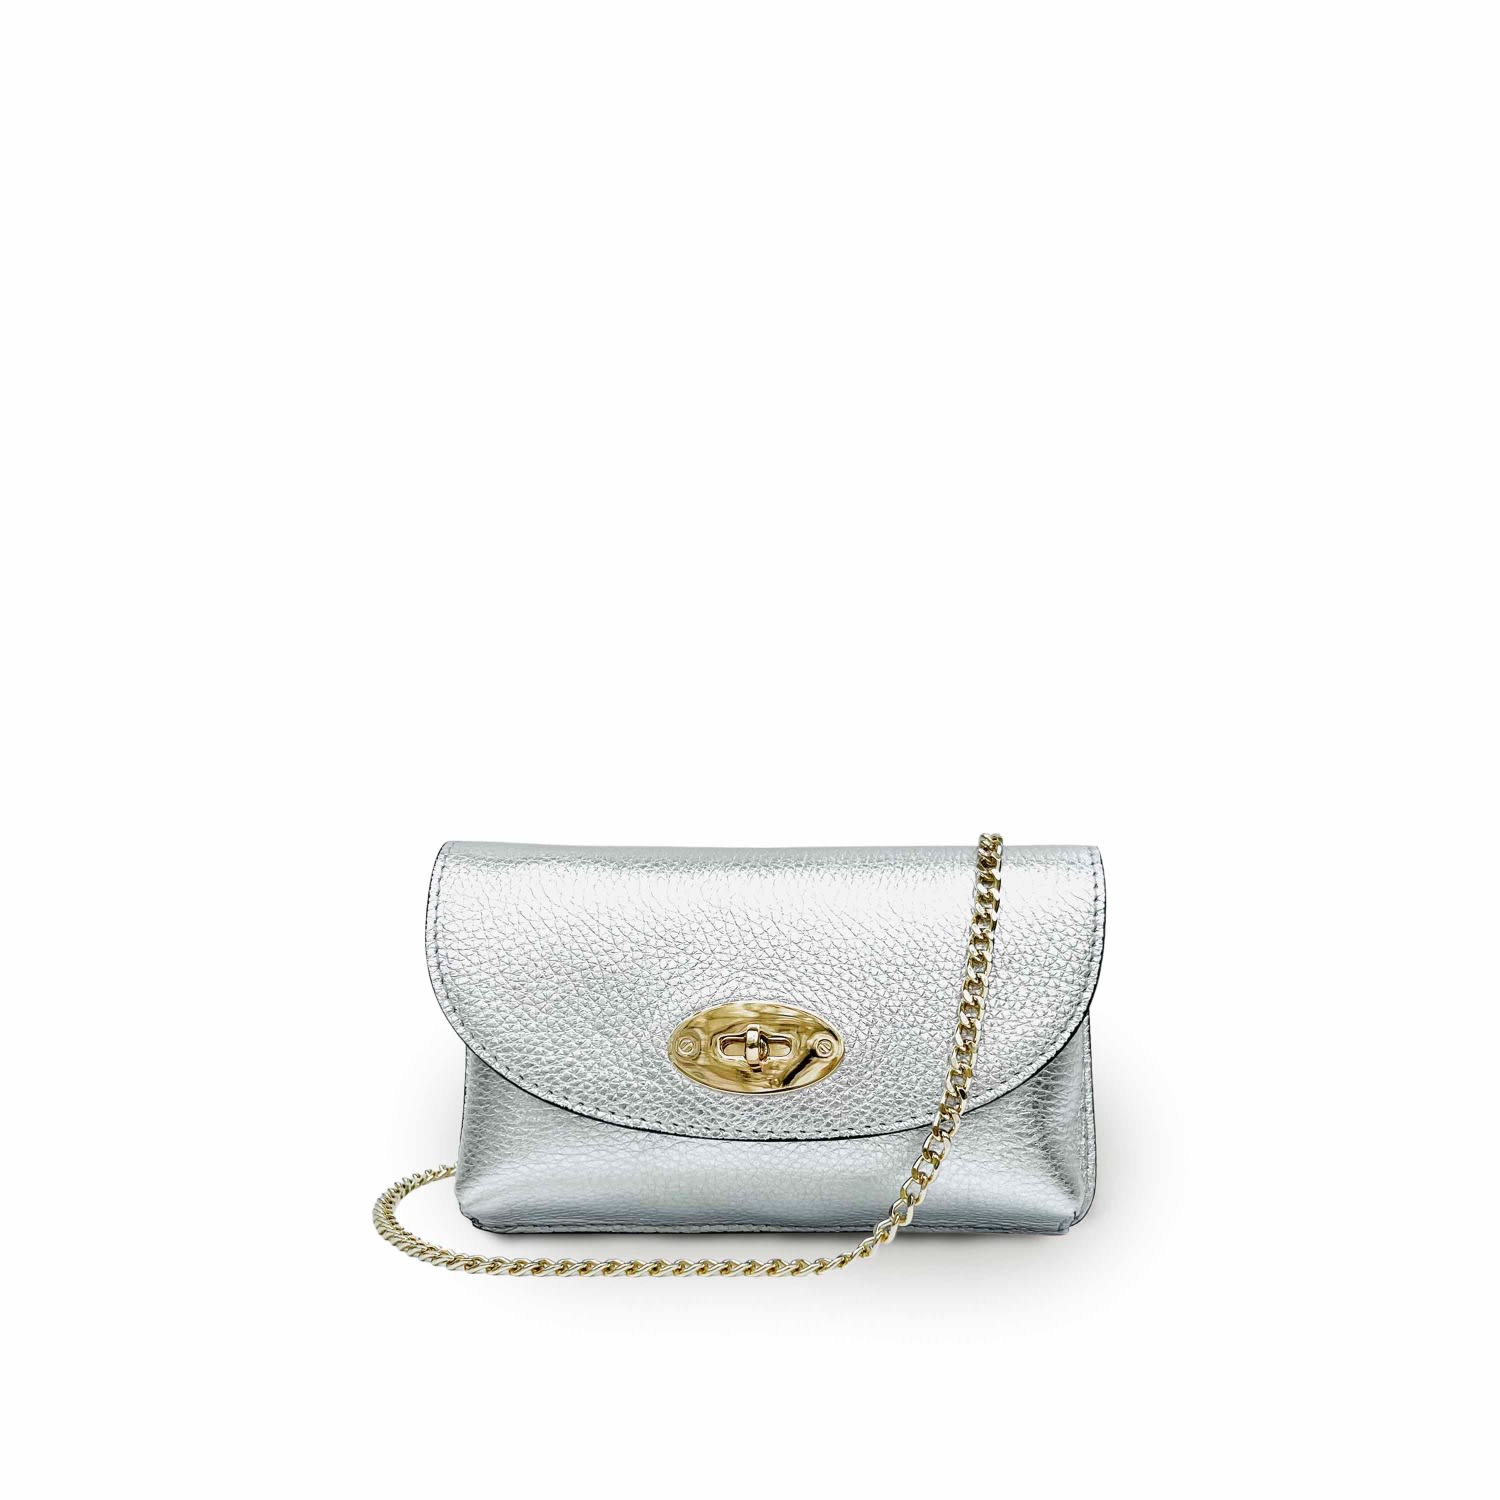 Apatchy London Women's The Mila Silver Leather Phone Bag In Metallic